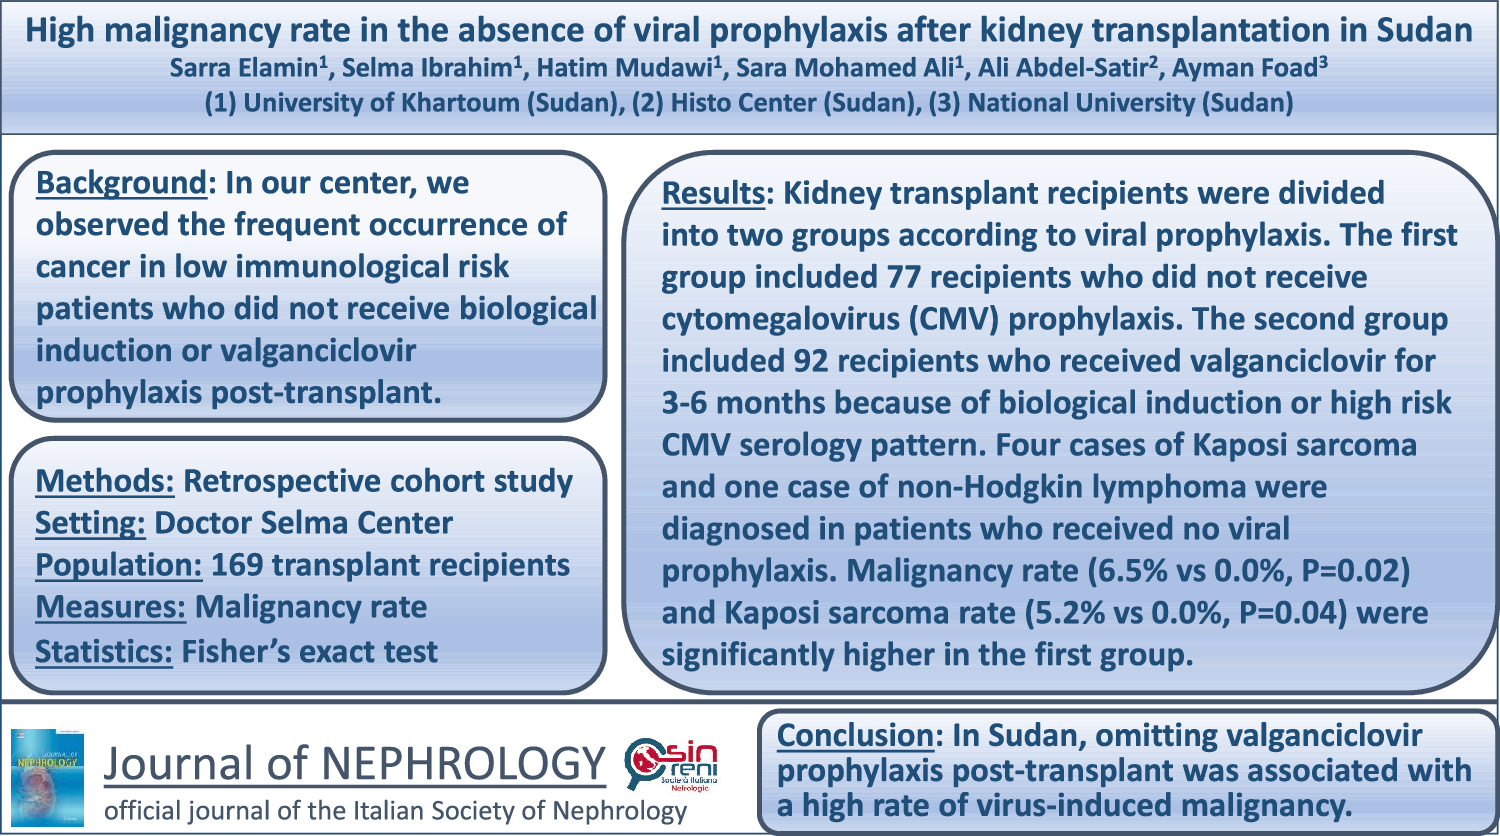 High malignancy rate in the absence of viral prophylaxis after kidney transplantation in Sudan